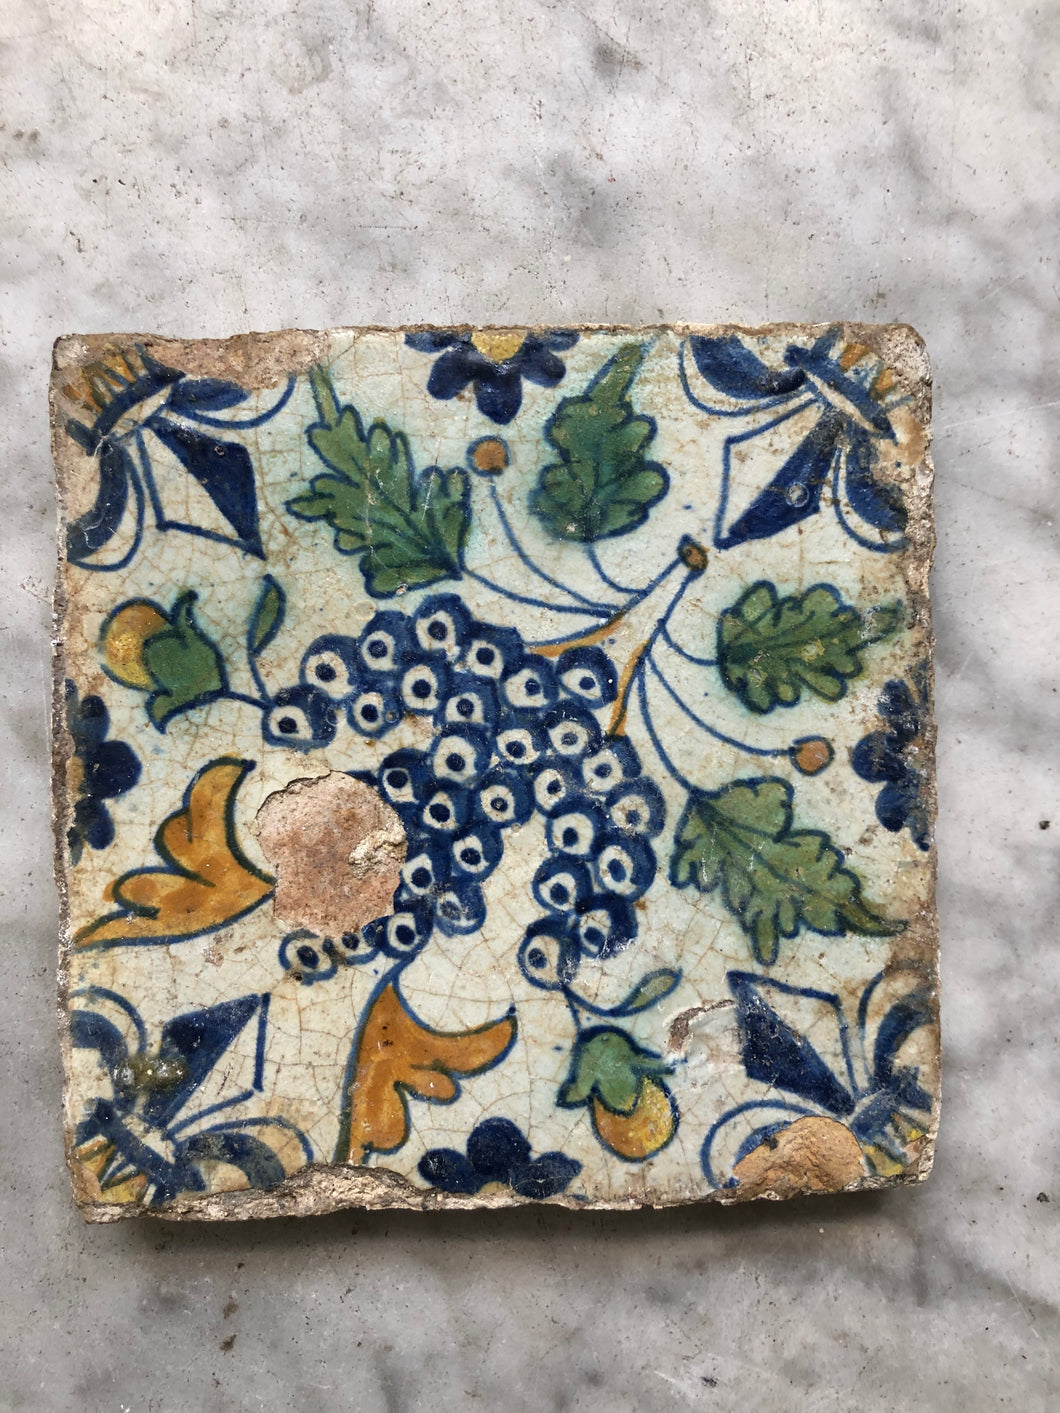 17 th century polychrome delft tile with grapes